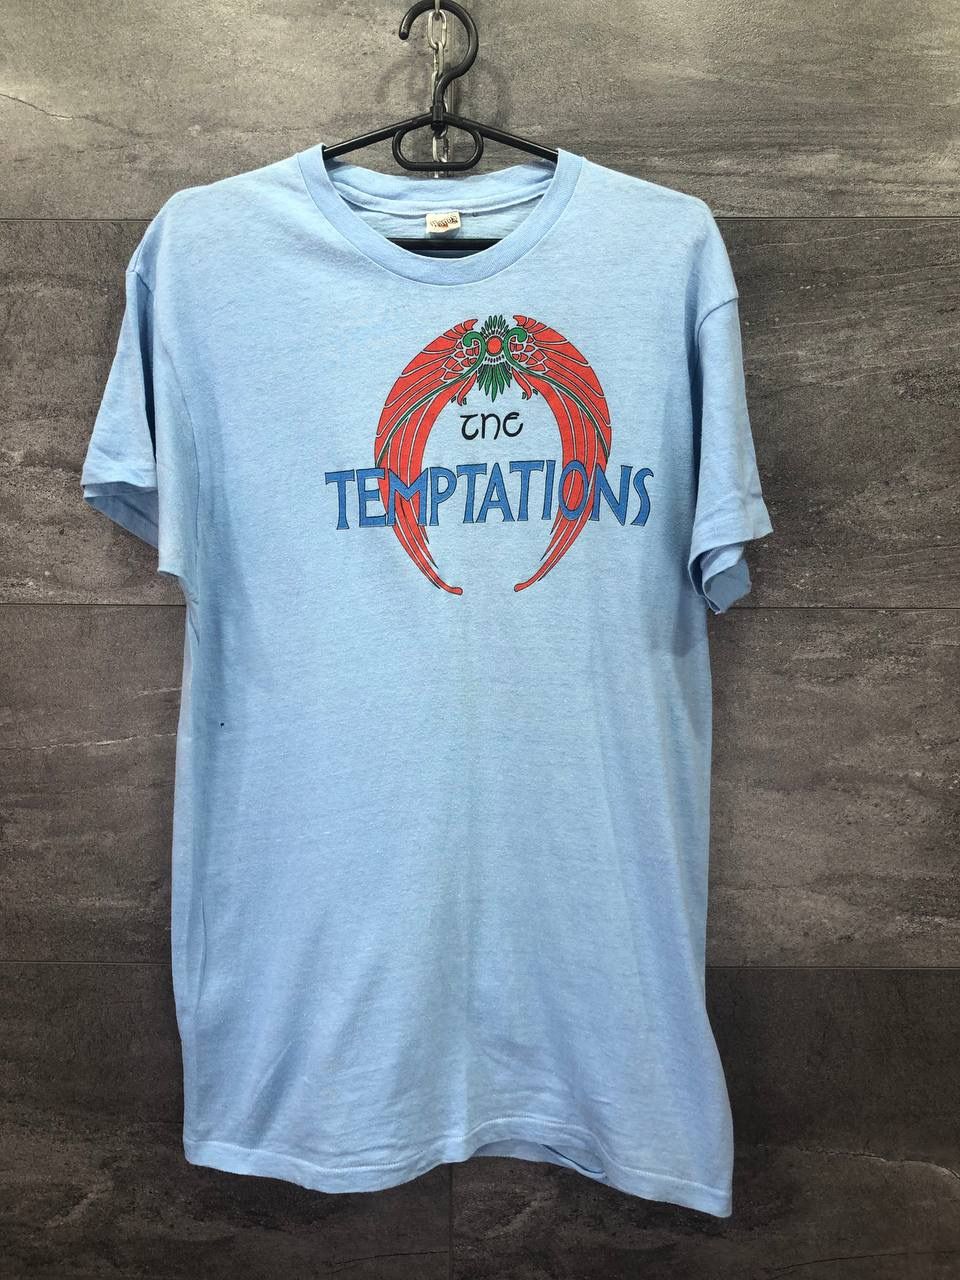 Pre-owned Band Tees X Tour Tee The Temptations Reunion Tour 1982 Vintage Tee T-shirt In Blue